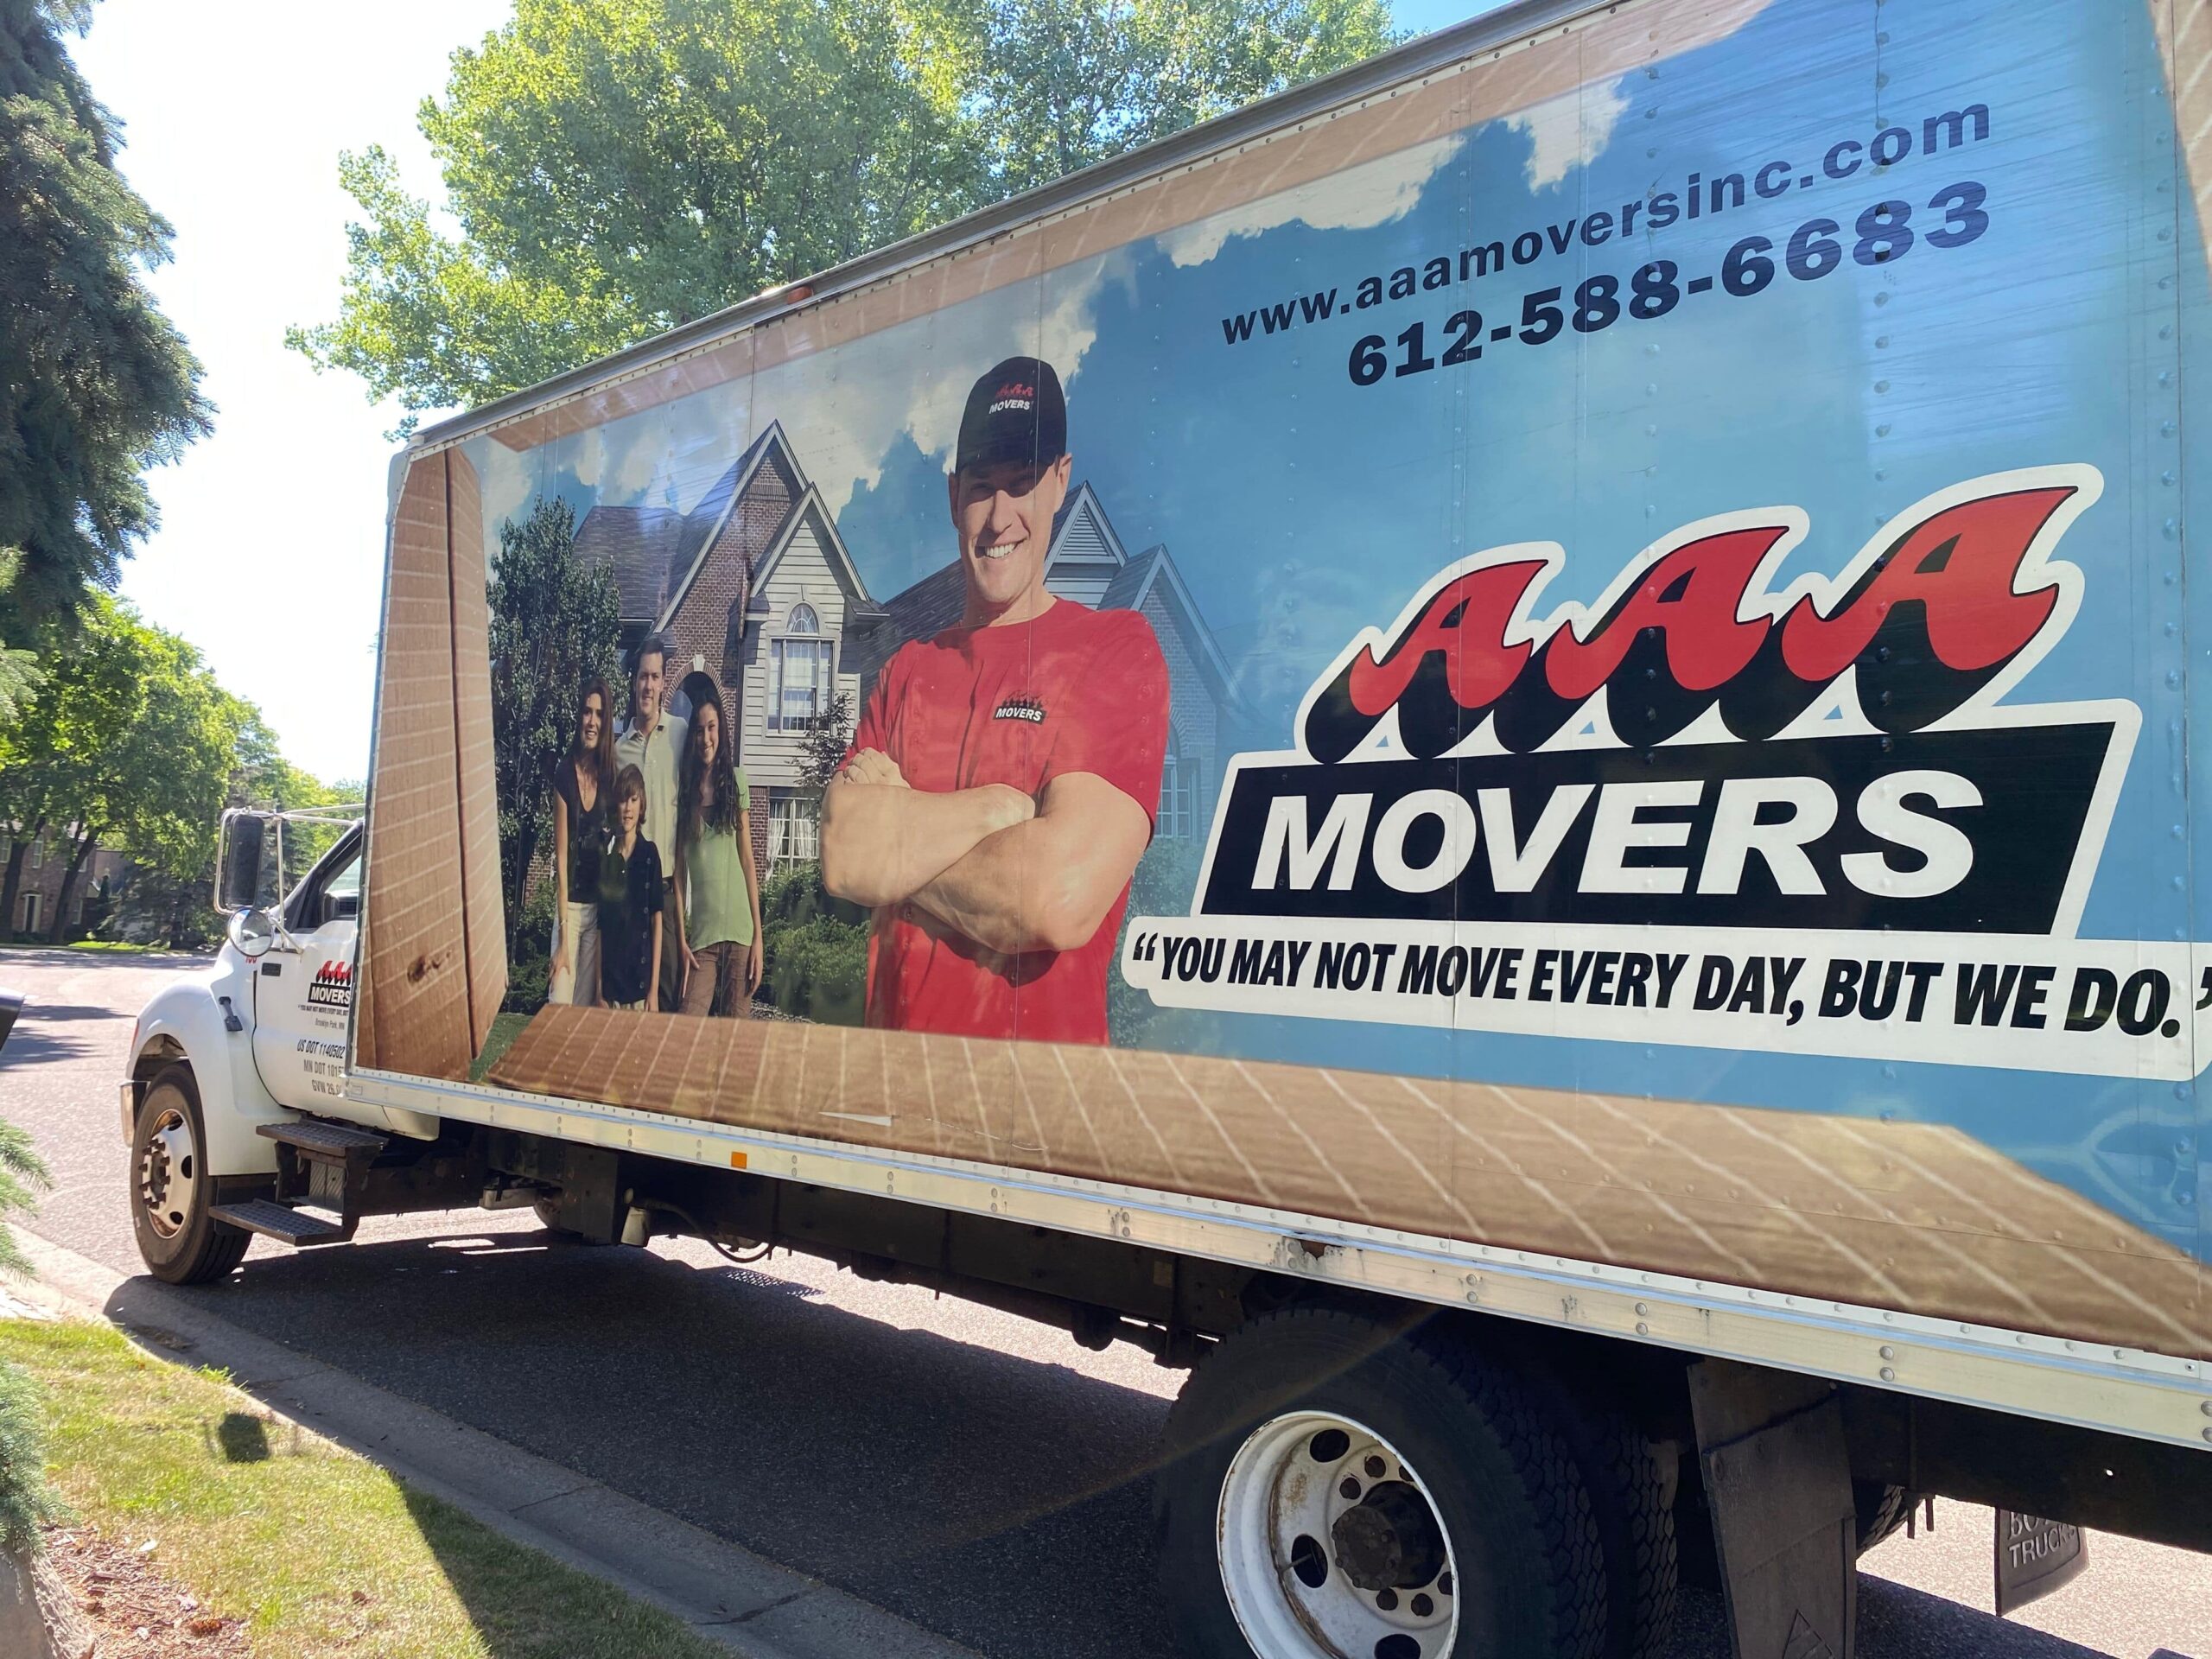 Side view of the AAA Movers truck